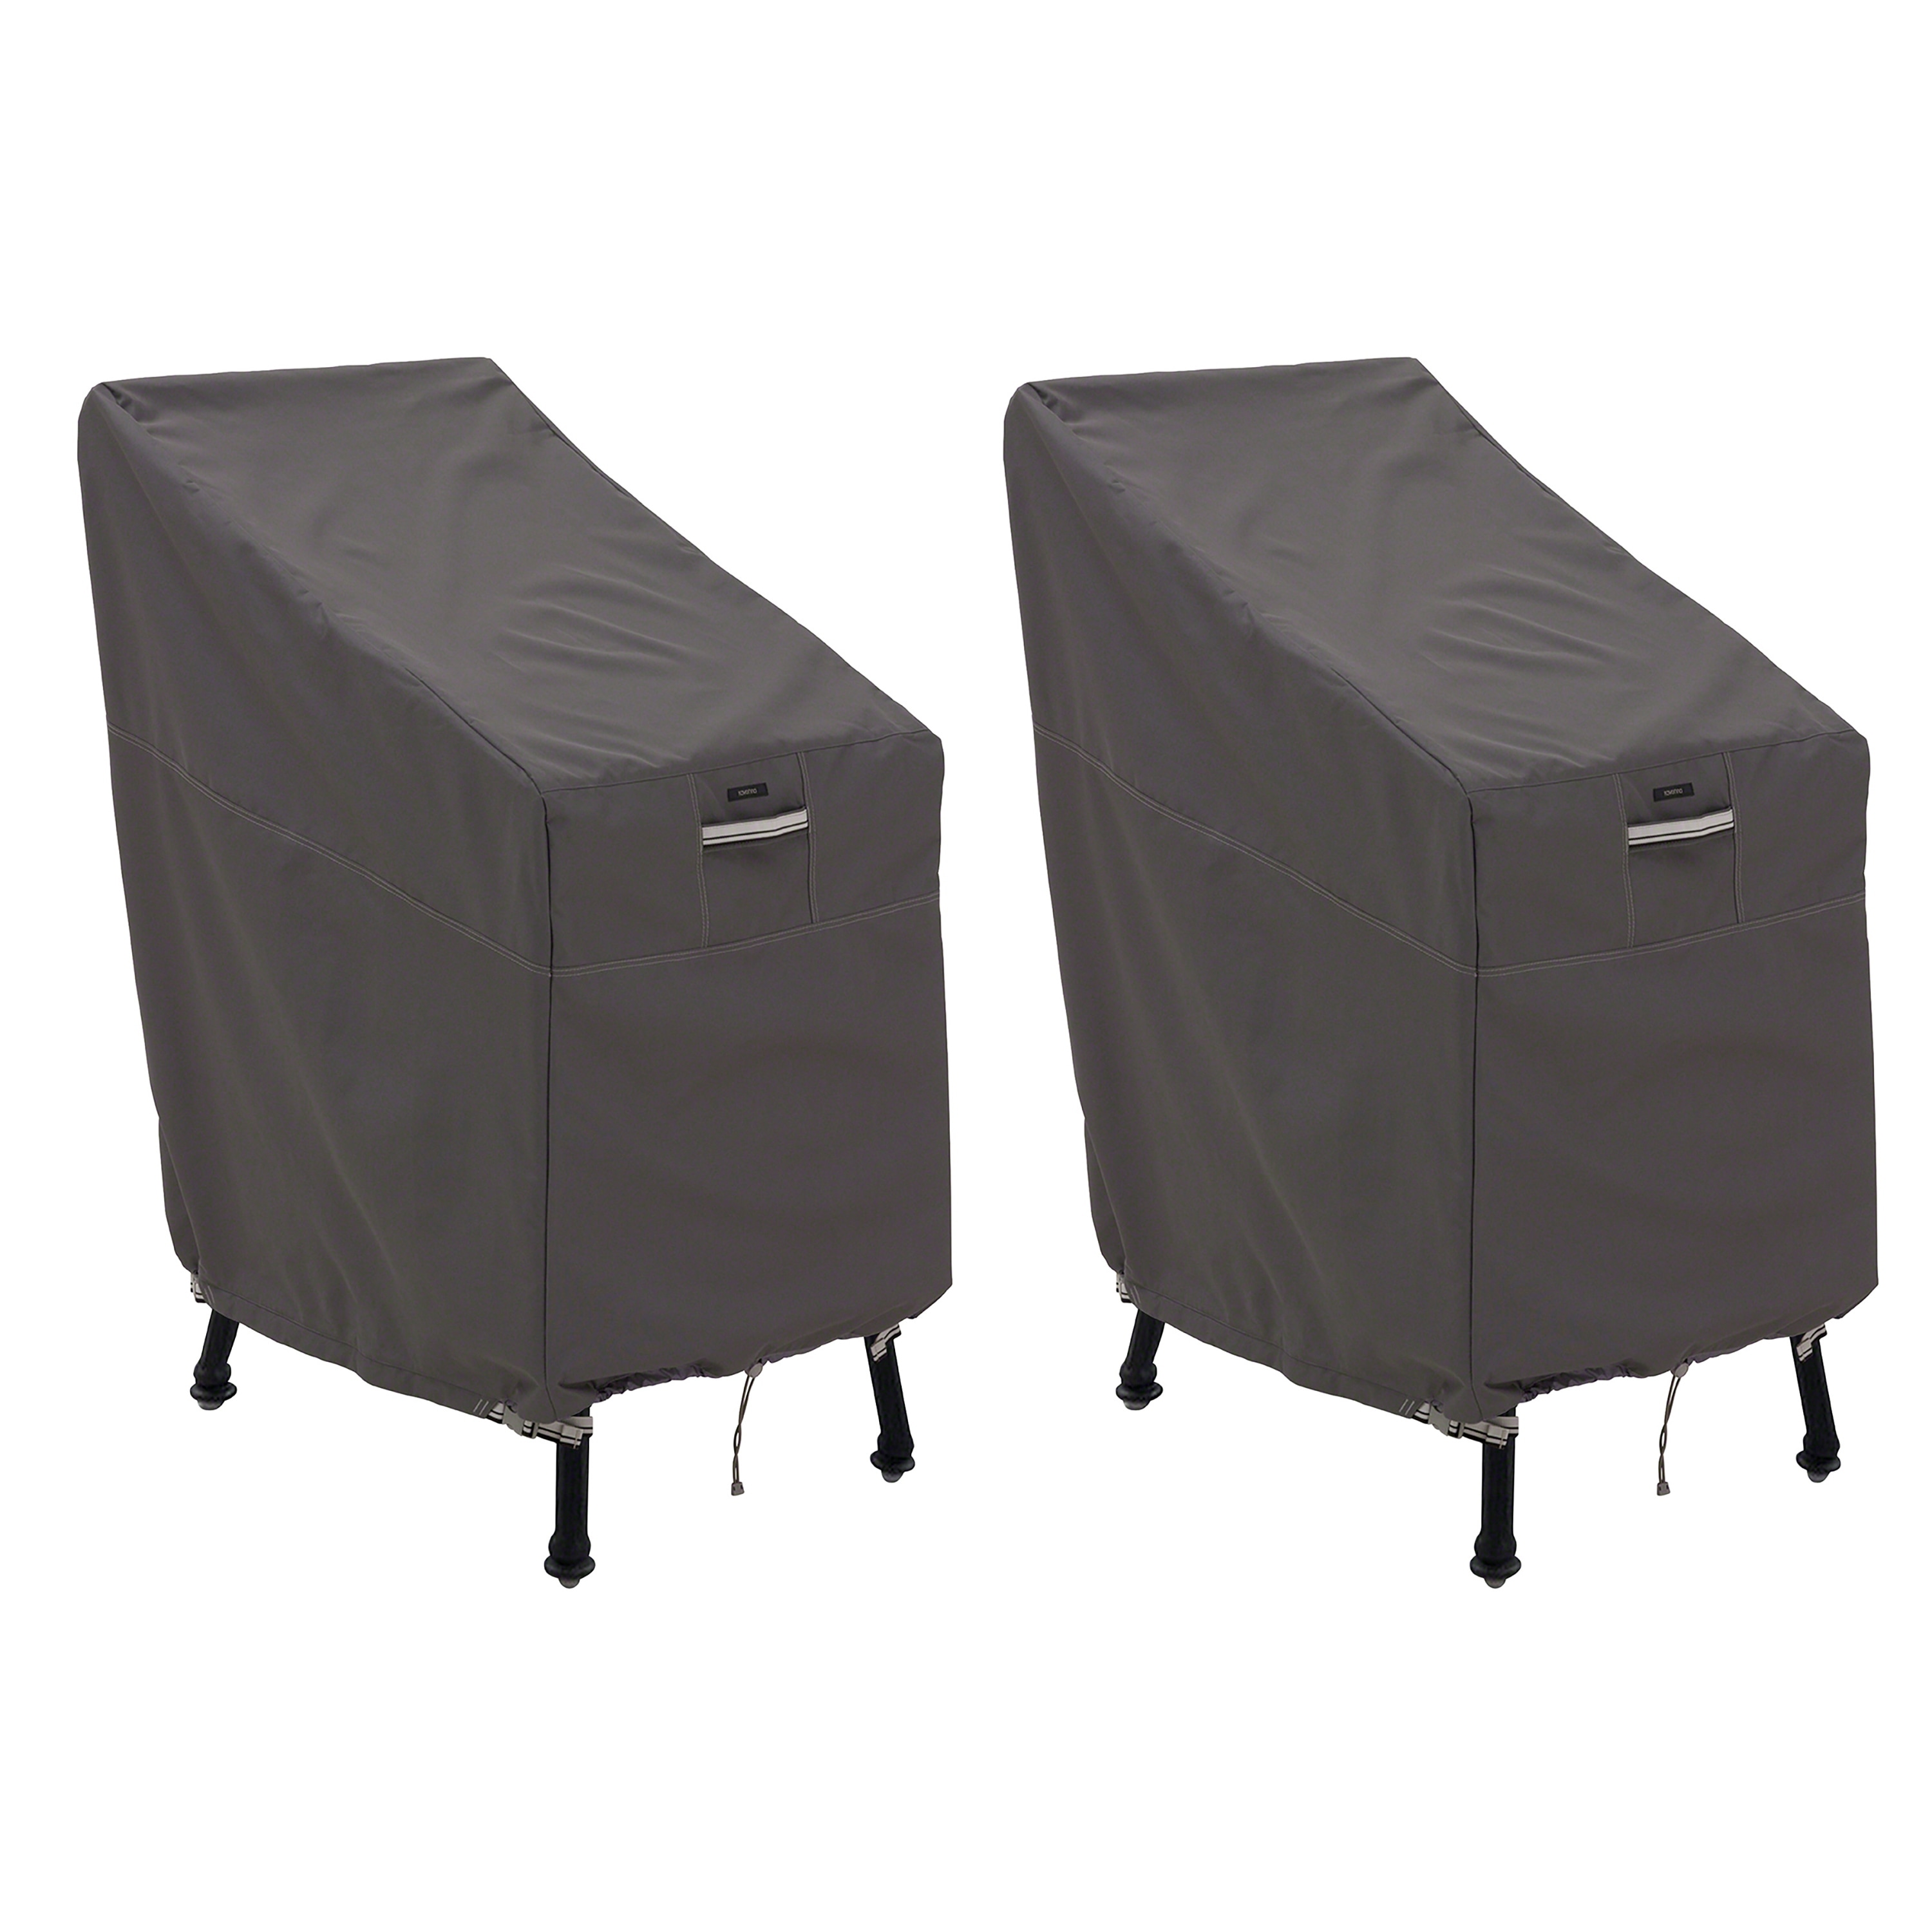 Classic Accessories Ravenna Water-Resistant 26 Inch Patio Bar Chair & Stool Cover, 2 Pack